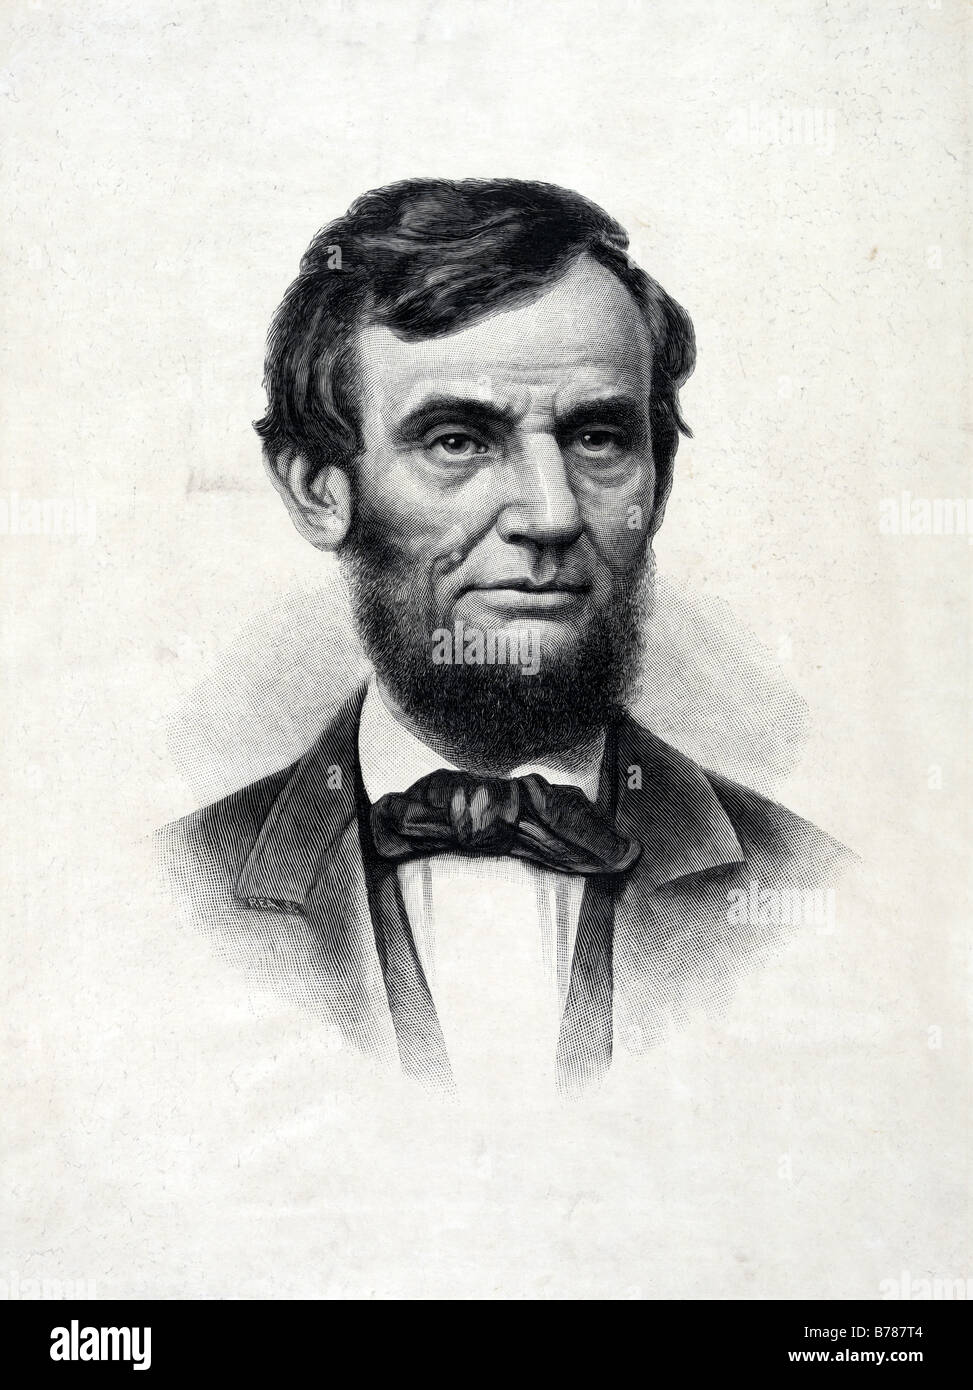 Abraham Lincoln 1809 1865 16th President of the United States Stock Photo